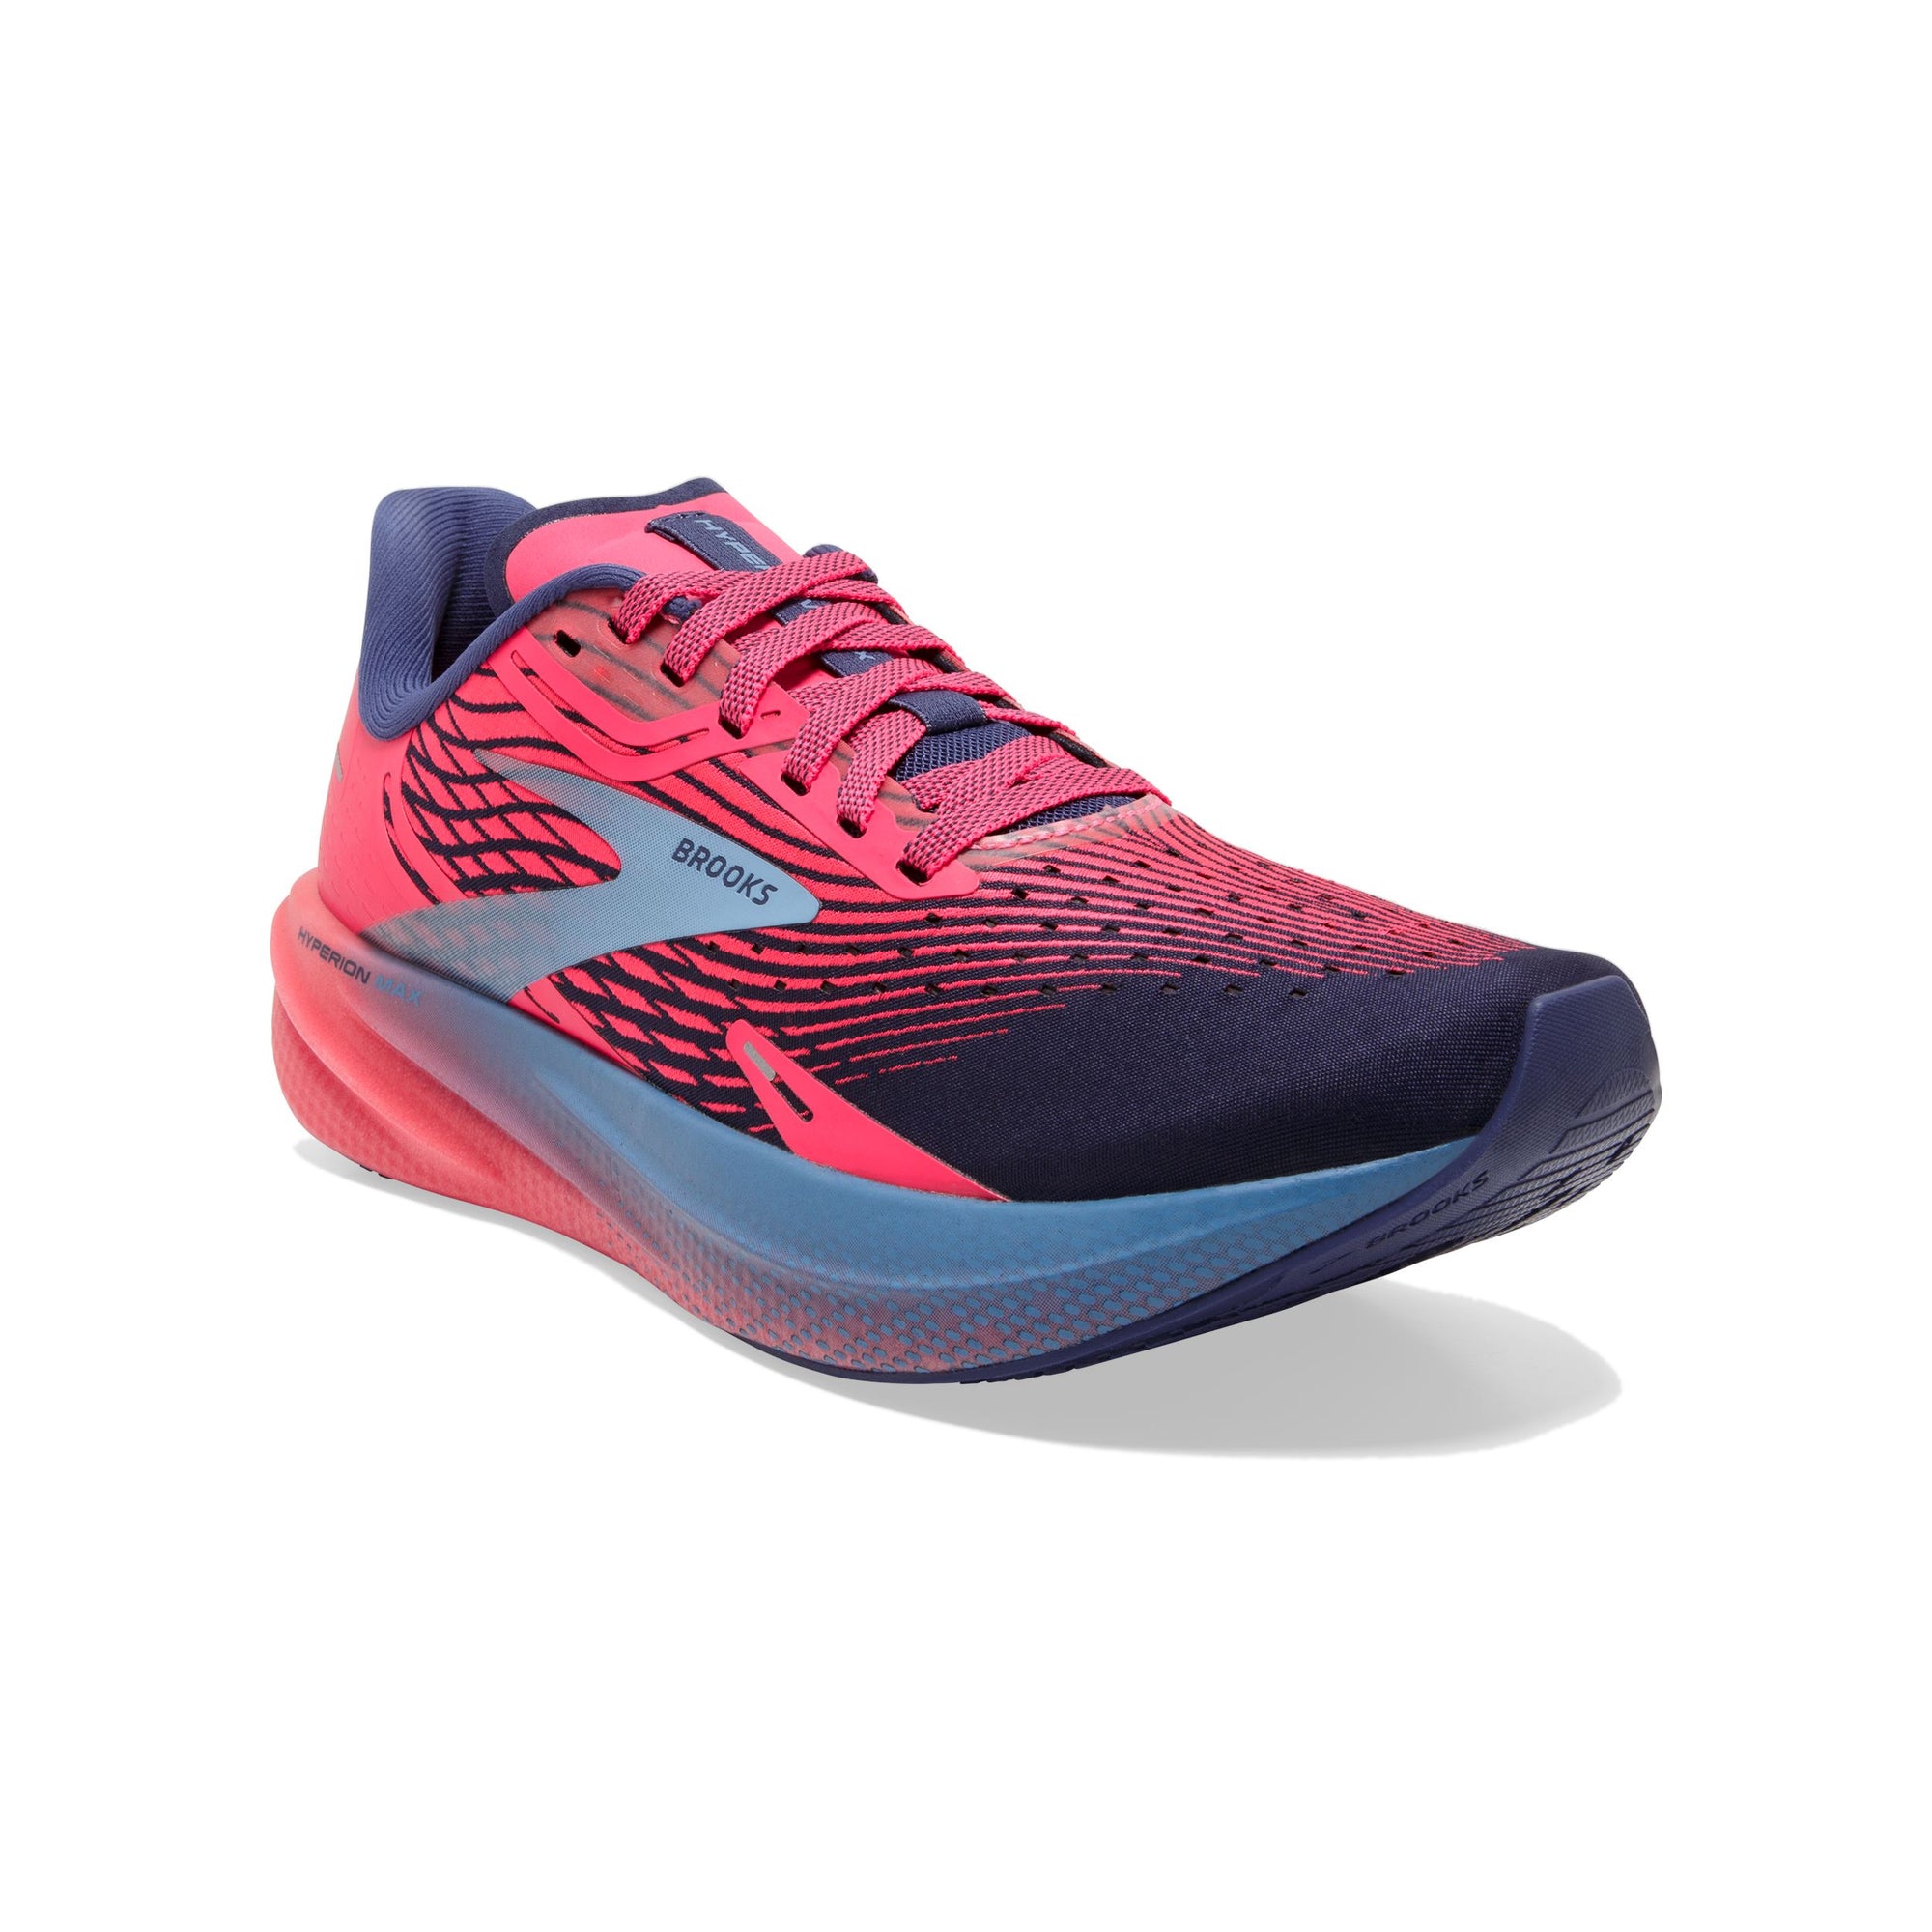 Brooks Women's Hyperion Max Road Running Shoes Pink/Cobalt/Blissful Blue US 6 